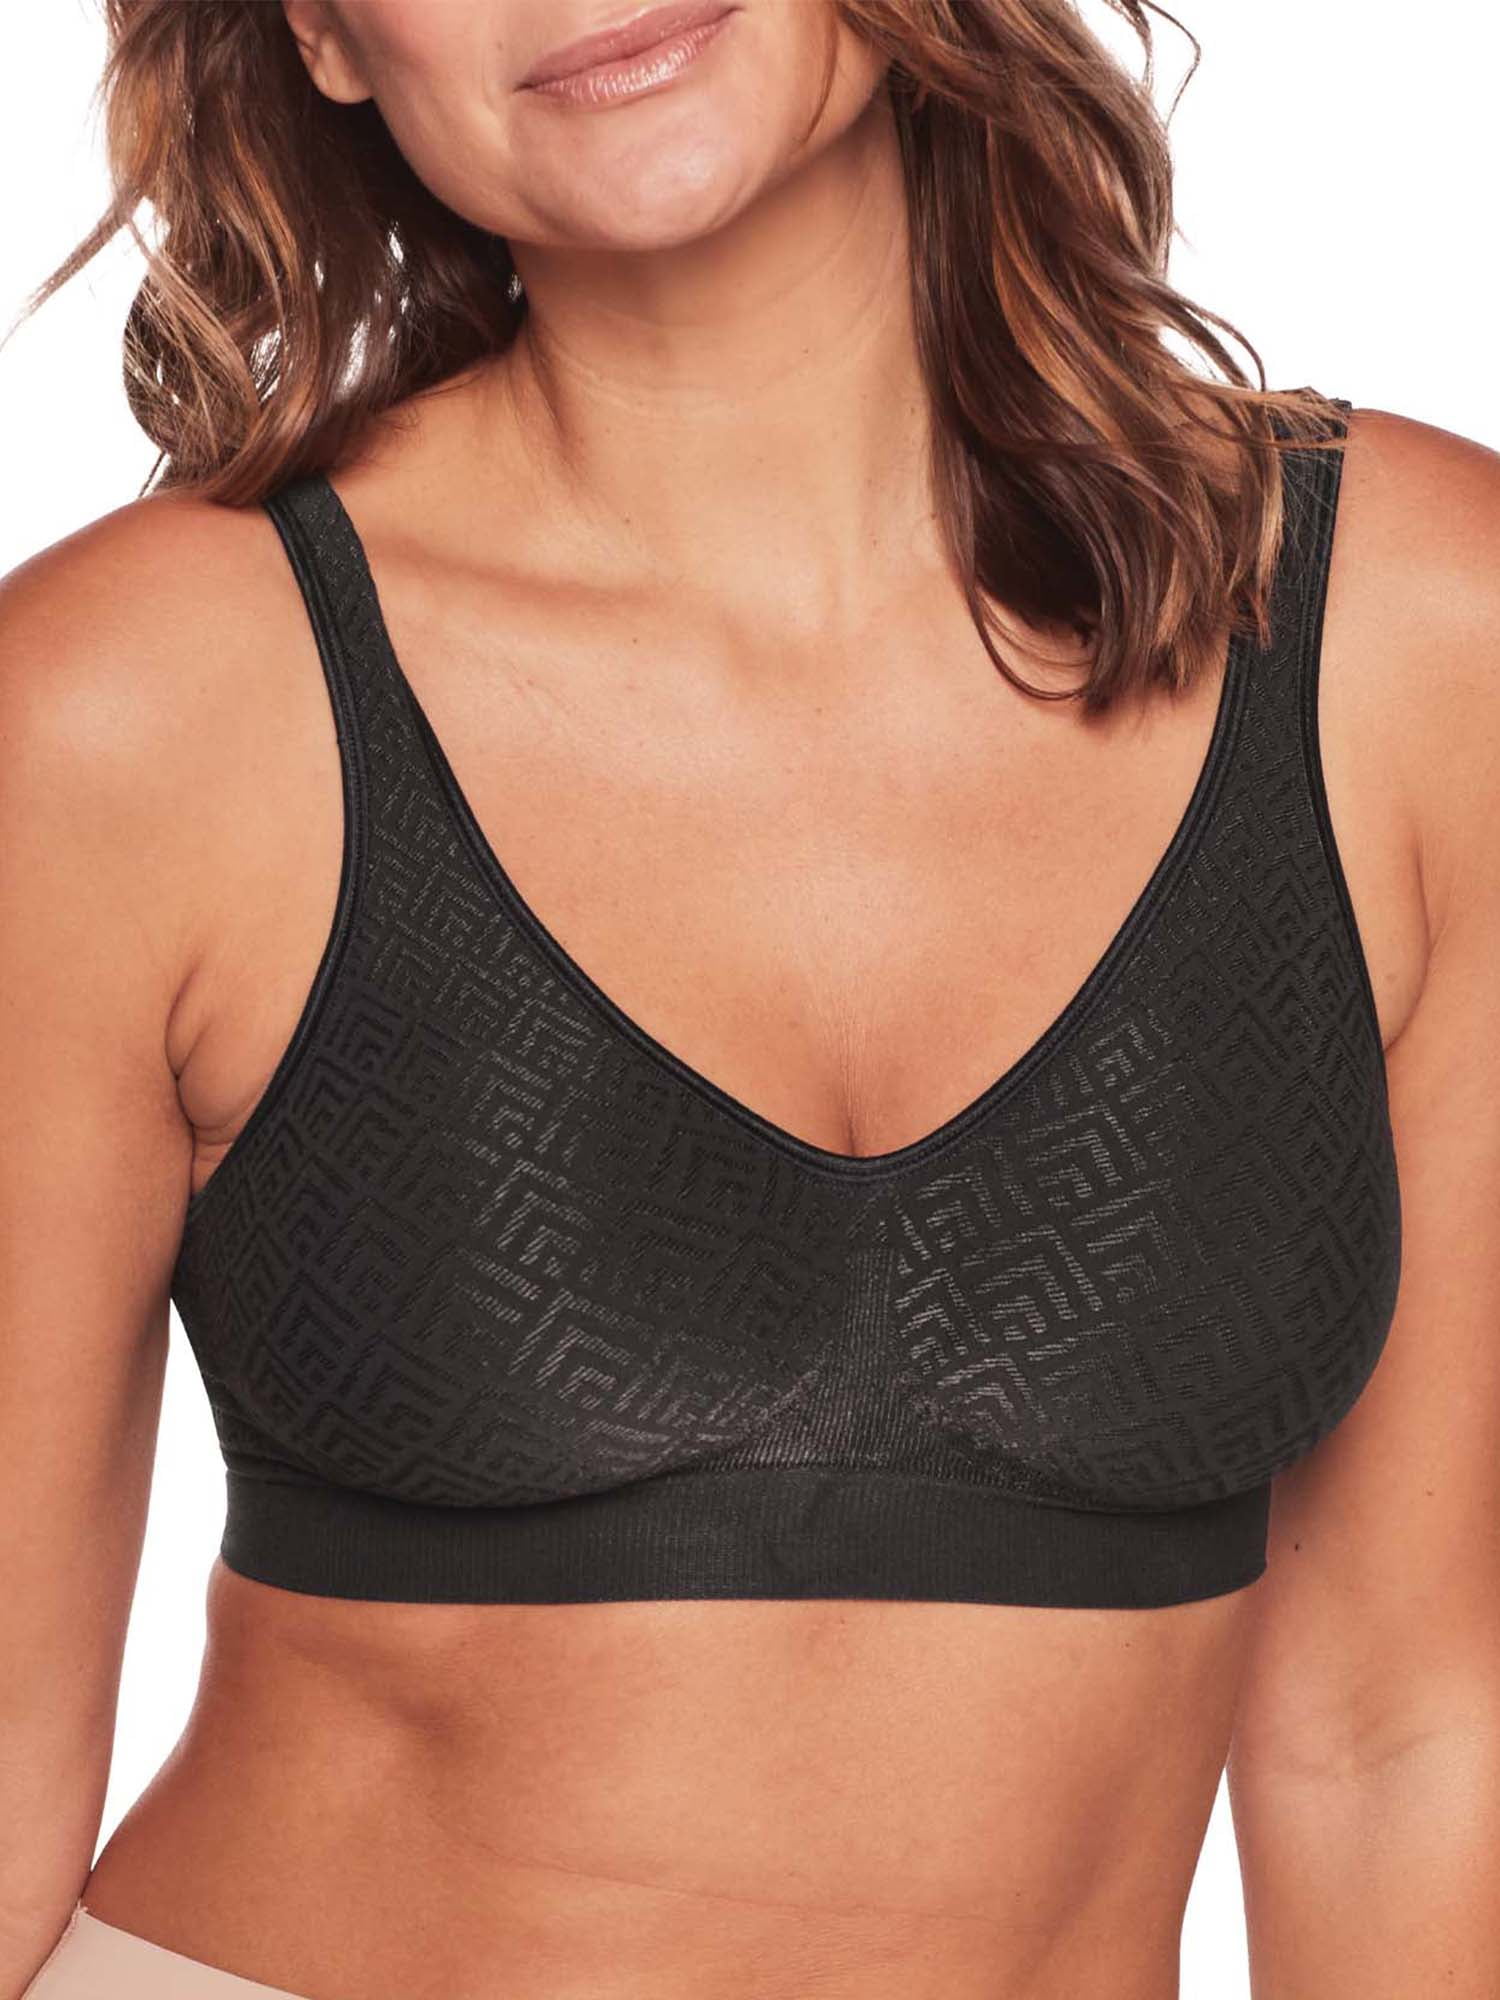 BALI WOMEN'S COMFORT Revolution Wirefree Bra with Smart Sizes DF3484  NO-TAGS $11.49 - PicClick